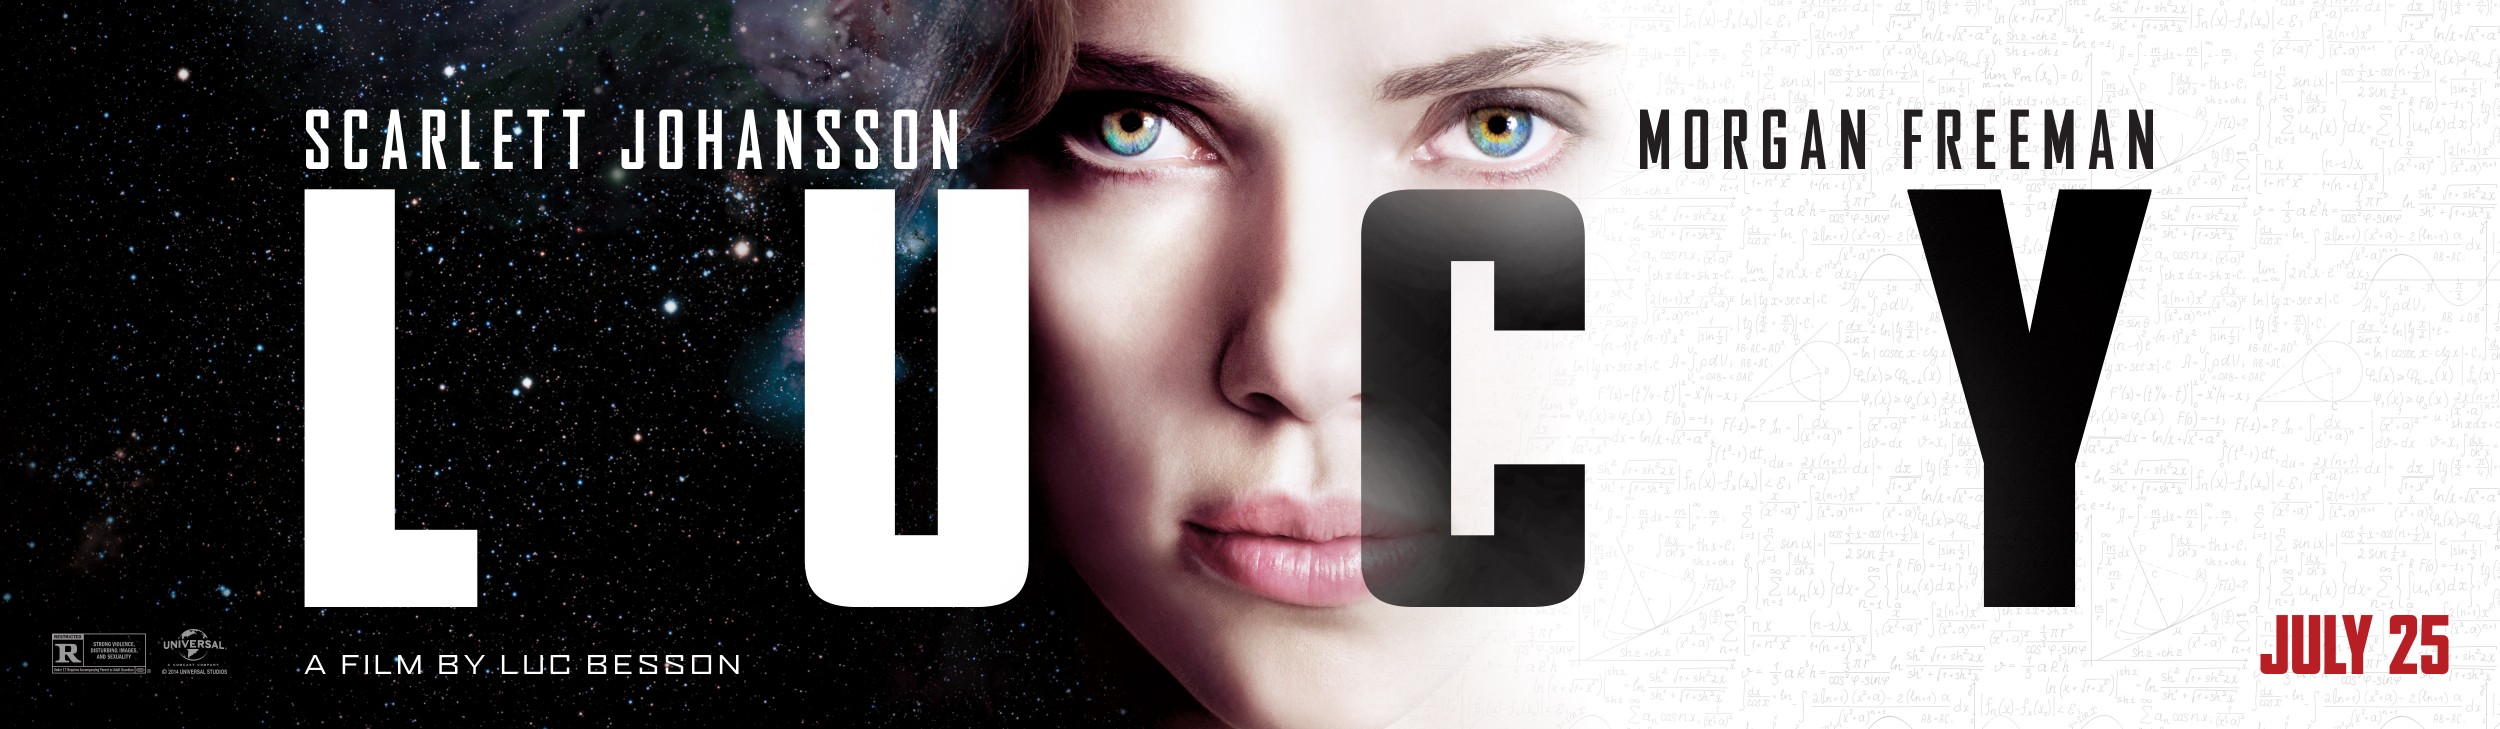 Mega Sized Movie Poster Image for Lucy (#4 of 4)